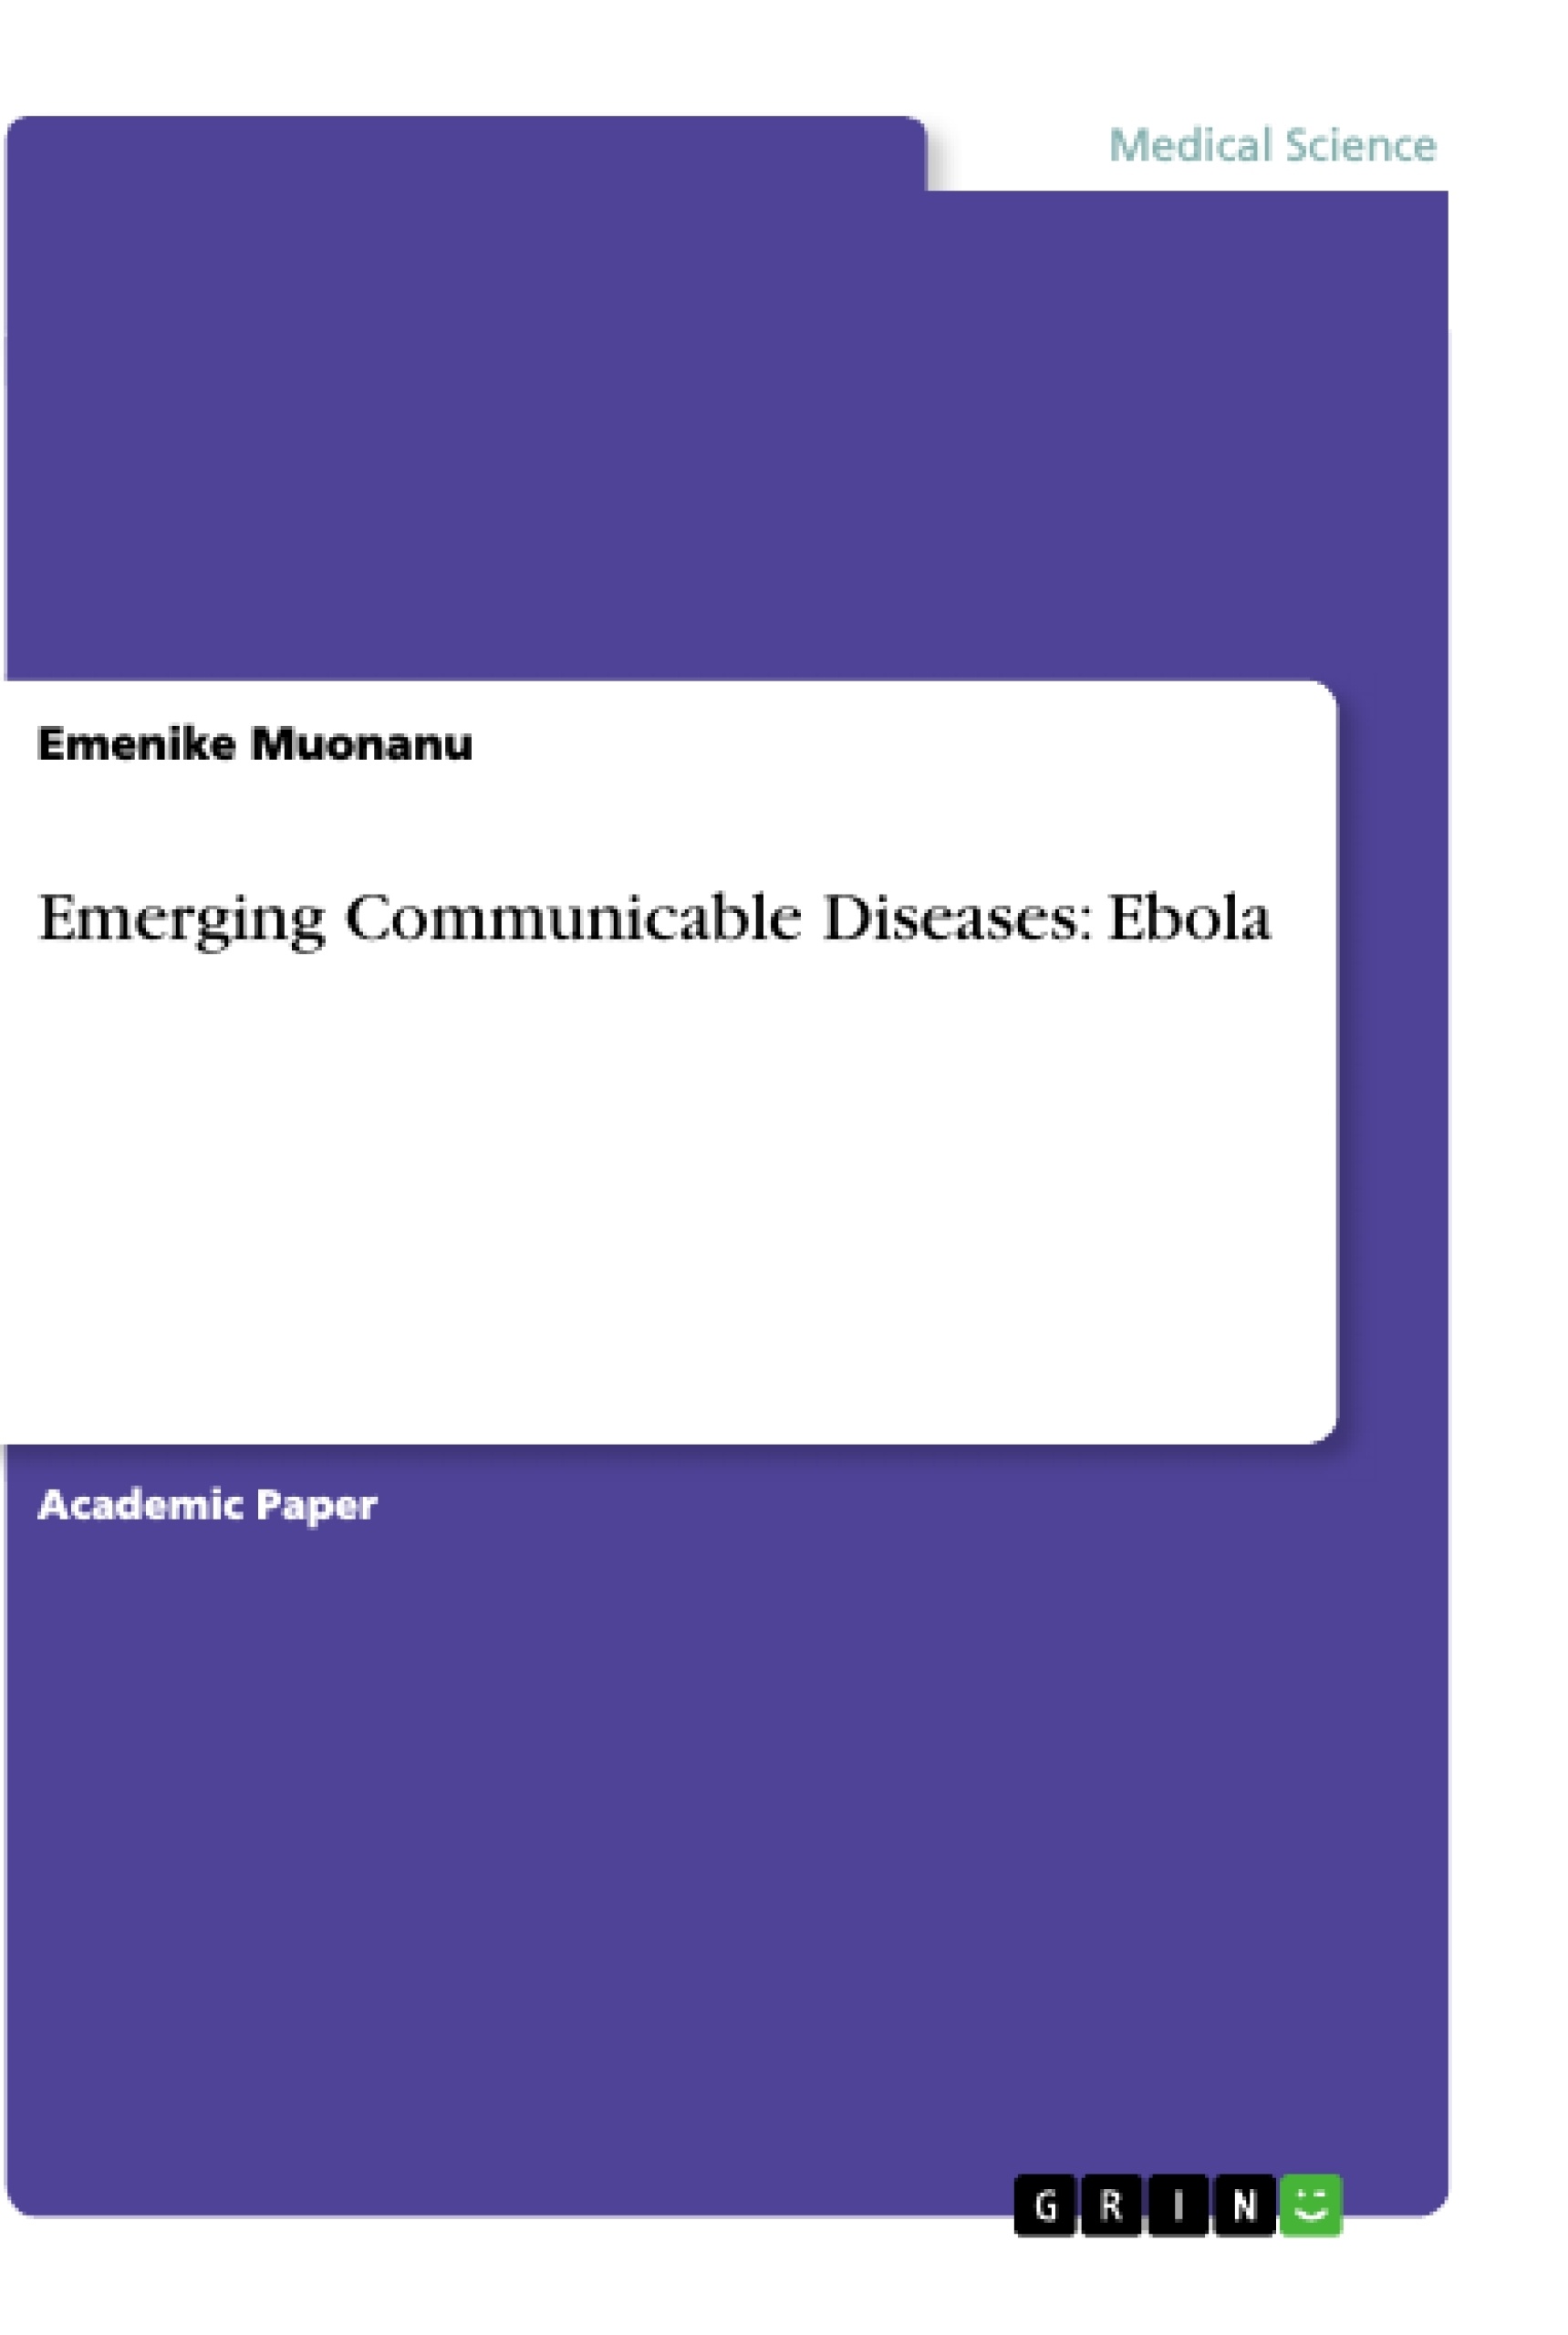 Título: Emerging Communicable Diseases: Ebola